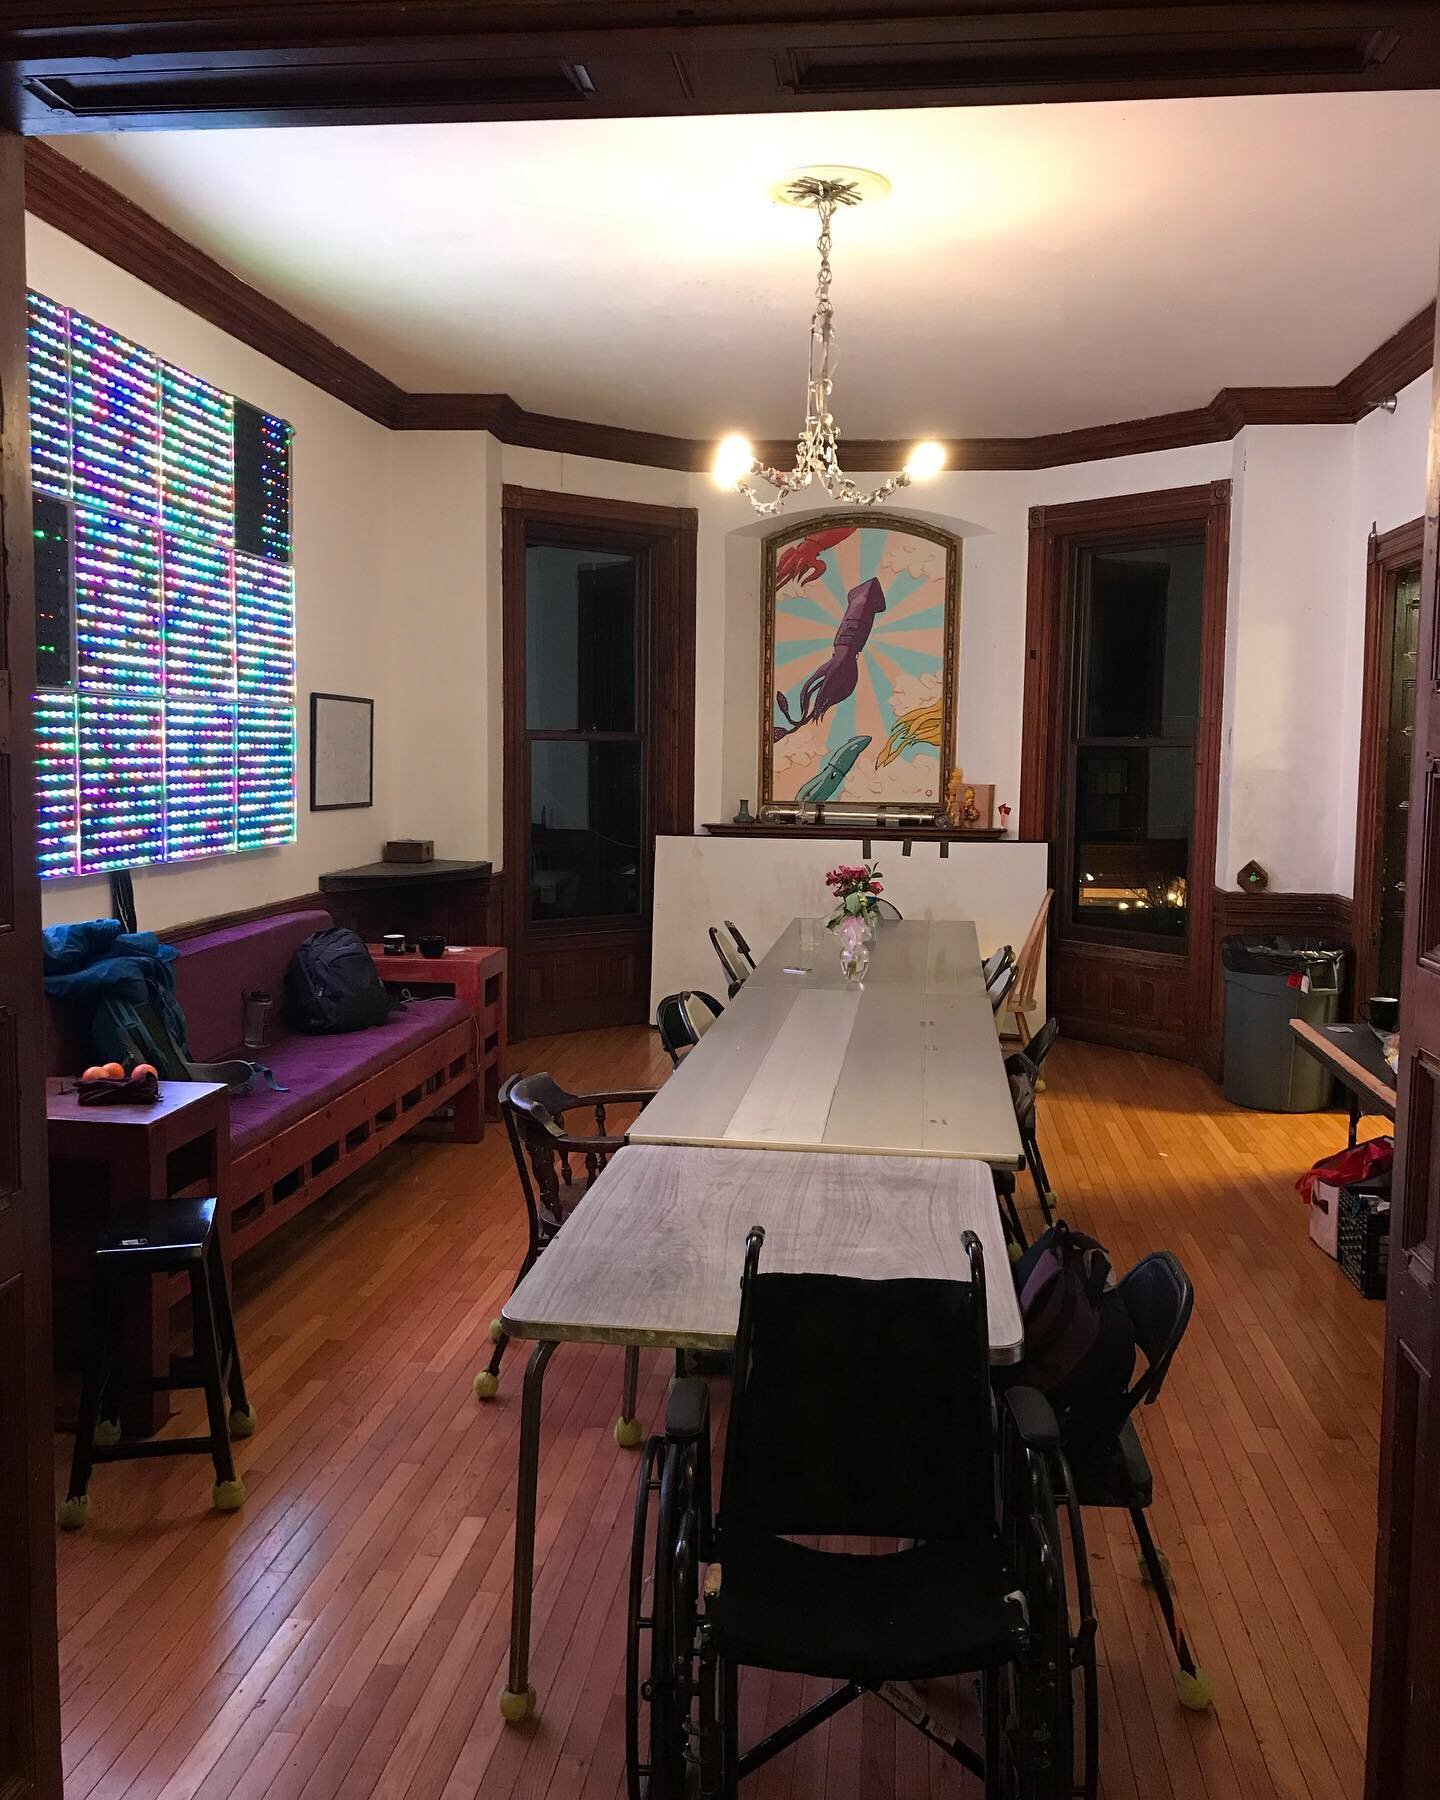 The dining room, empty, featuring tEpilepsy, our programmable LED board, our squid mural, and the chandelier made out of silverware